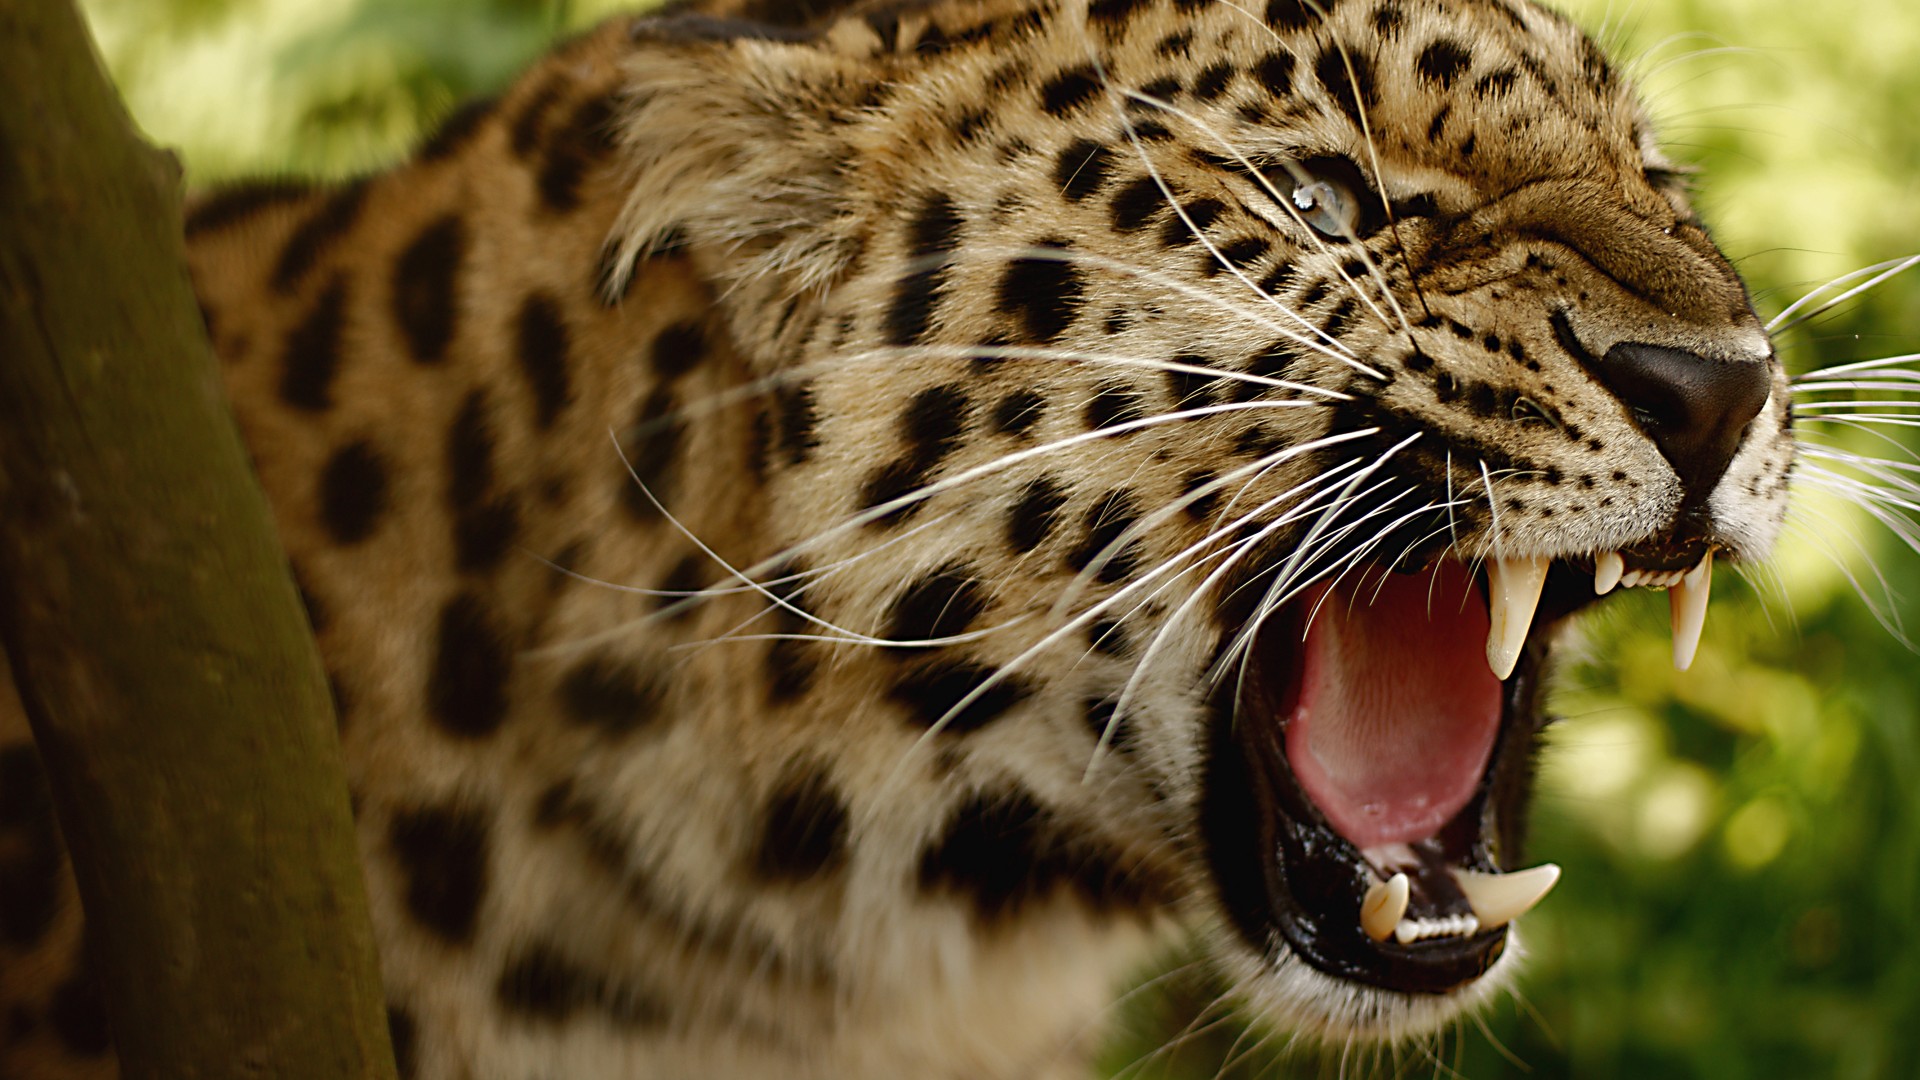 leopard wallpaper angry